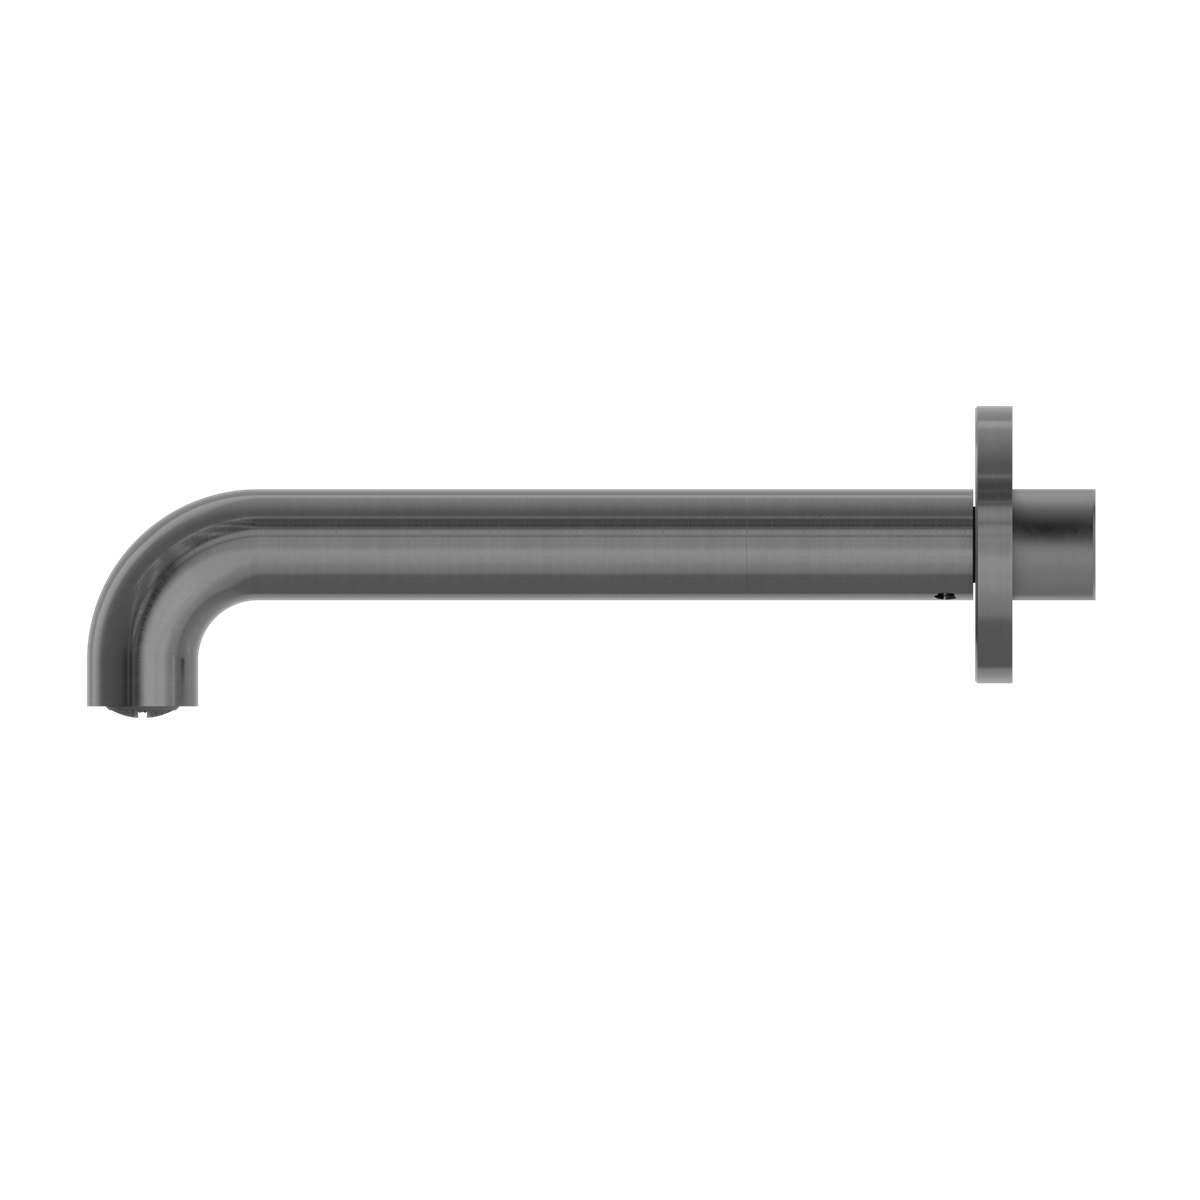 NERO MECCA BASIN/ BATH SPOUT GRAPHITE (AVAILABLE IN 120MM, 160MM, 185MM, 230MM AND 260MM)